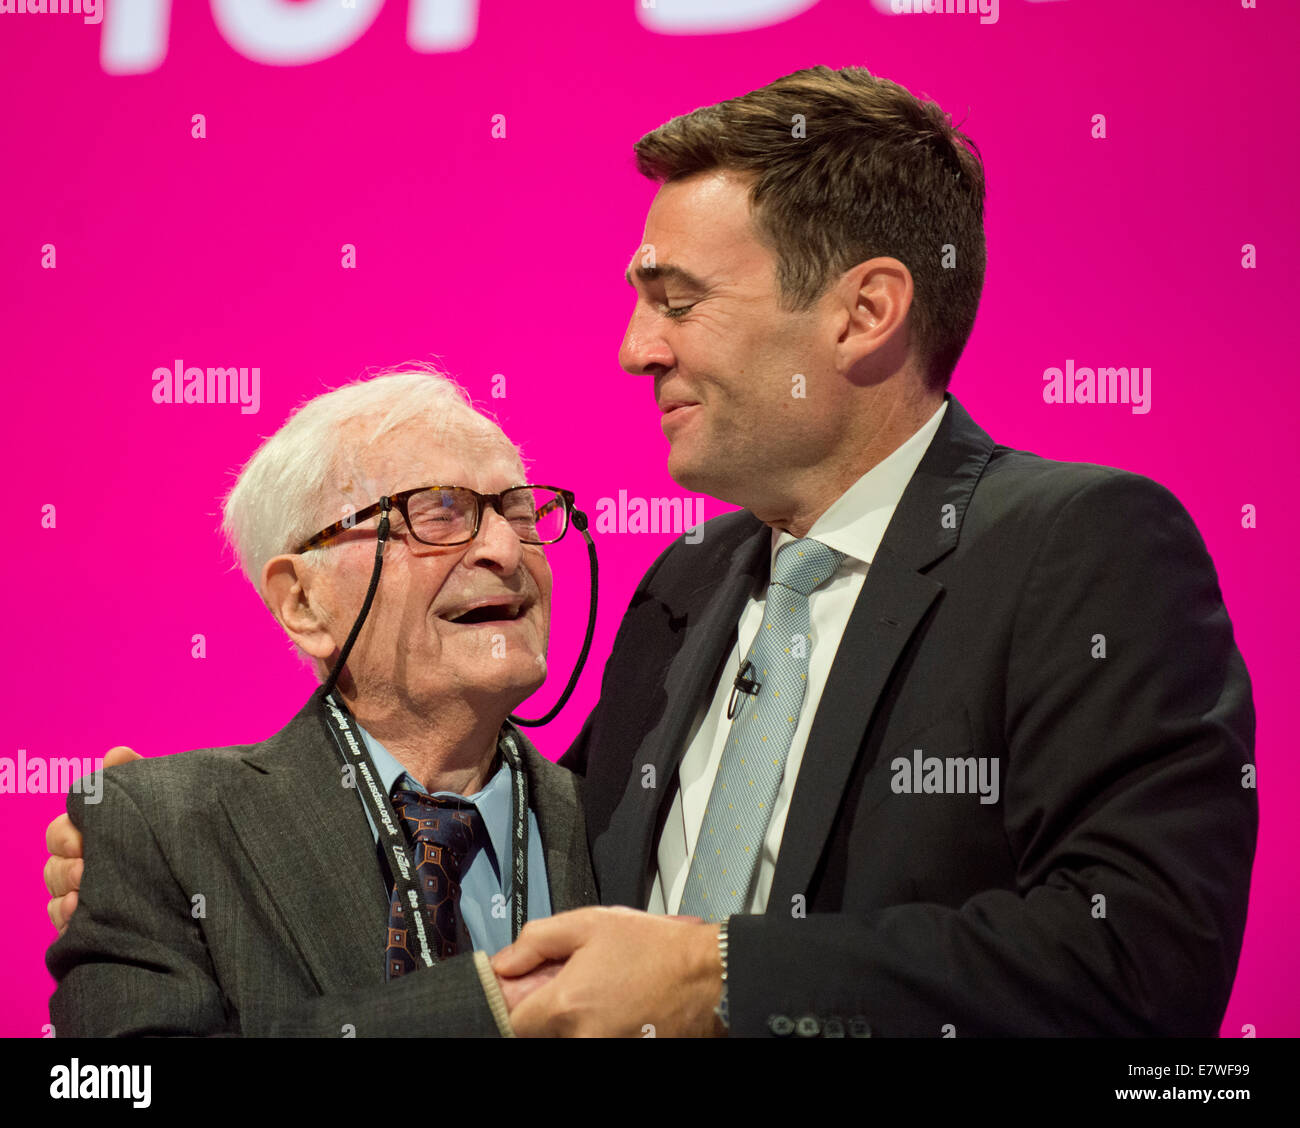 Manchester, UK. 24th September, 2014. 91-year-old campaigner Harry Smith is greeted by Shadow Secretary of State for Health Andy Burnham after his address to the auditorium on day four of the Labour Party's Annual Conference taking place at Manchester Central Convention Complex Credit:  Russell Hart/Alamy Live News. Stock Photo